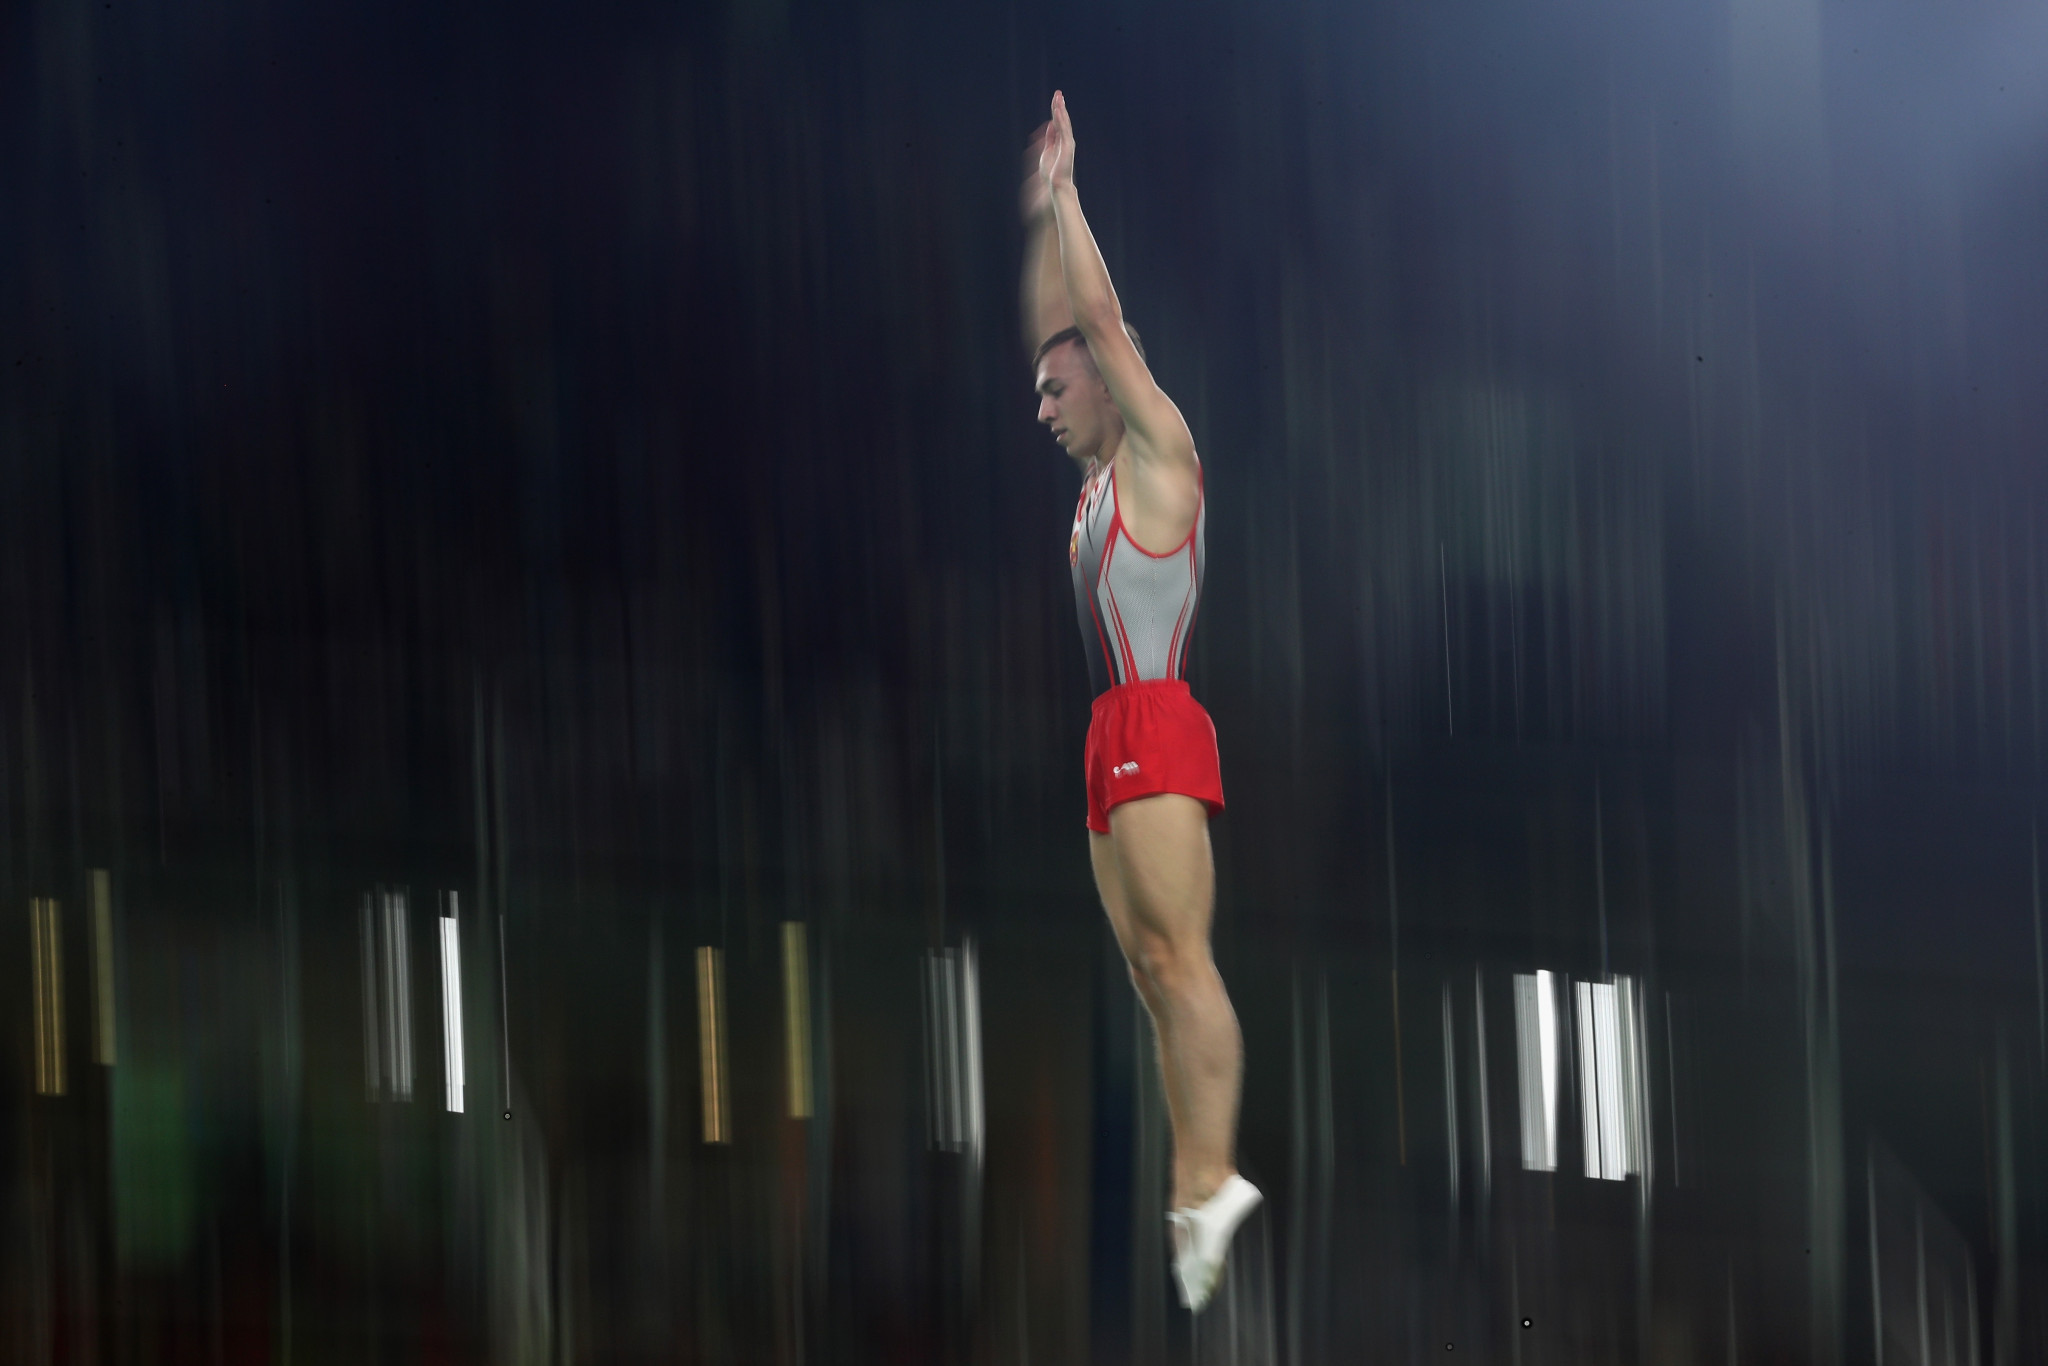 Olympic champion Uladzislau Hancharou of Belarus qualified in fifth place in the men's event at the Trampoline Gymnastics World Championships ©Getty Images